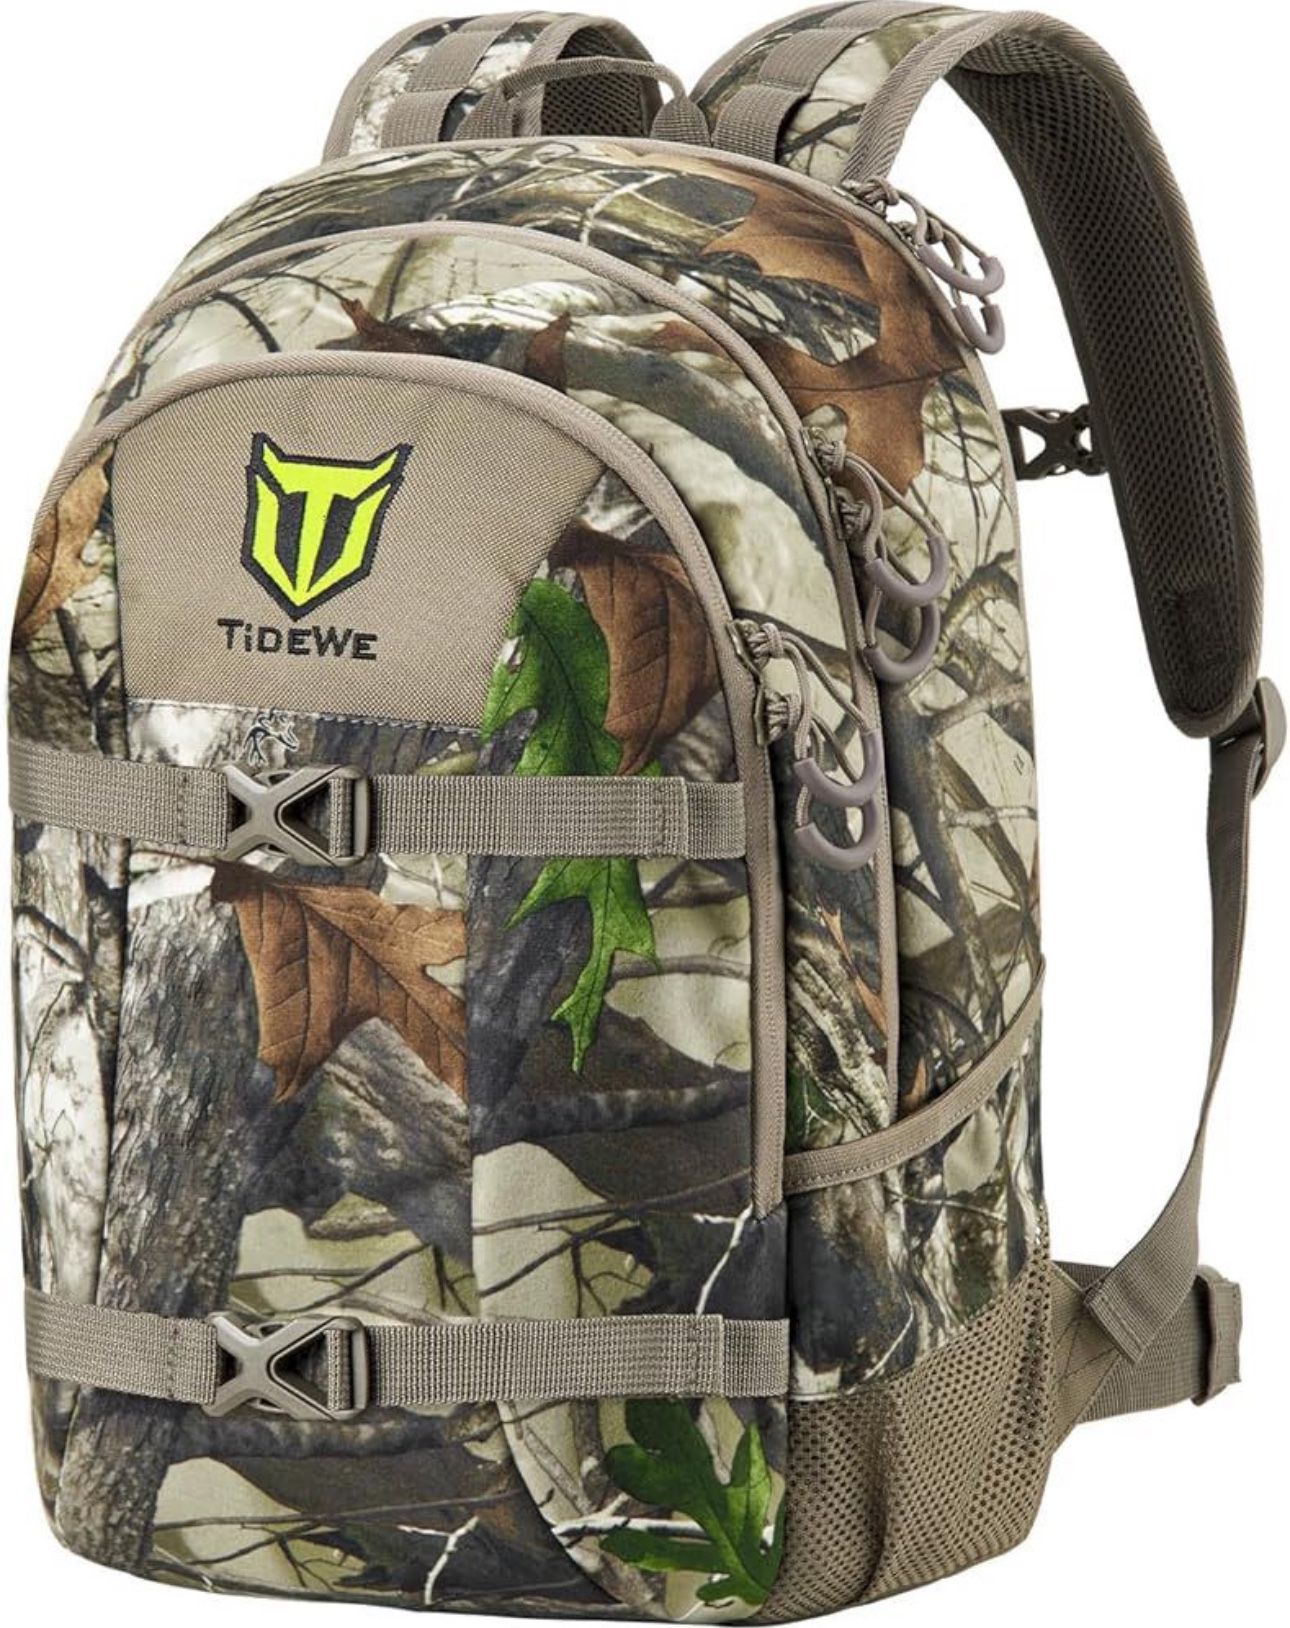 TIDEWE Hunting Backpack with Waterproof Rain Cover, 25L Hunting Pack, Durable Hunting Day Pack f Brand new 